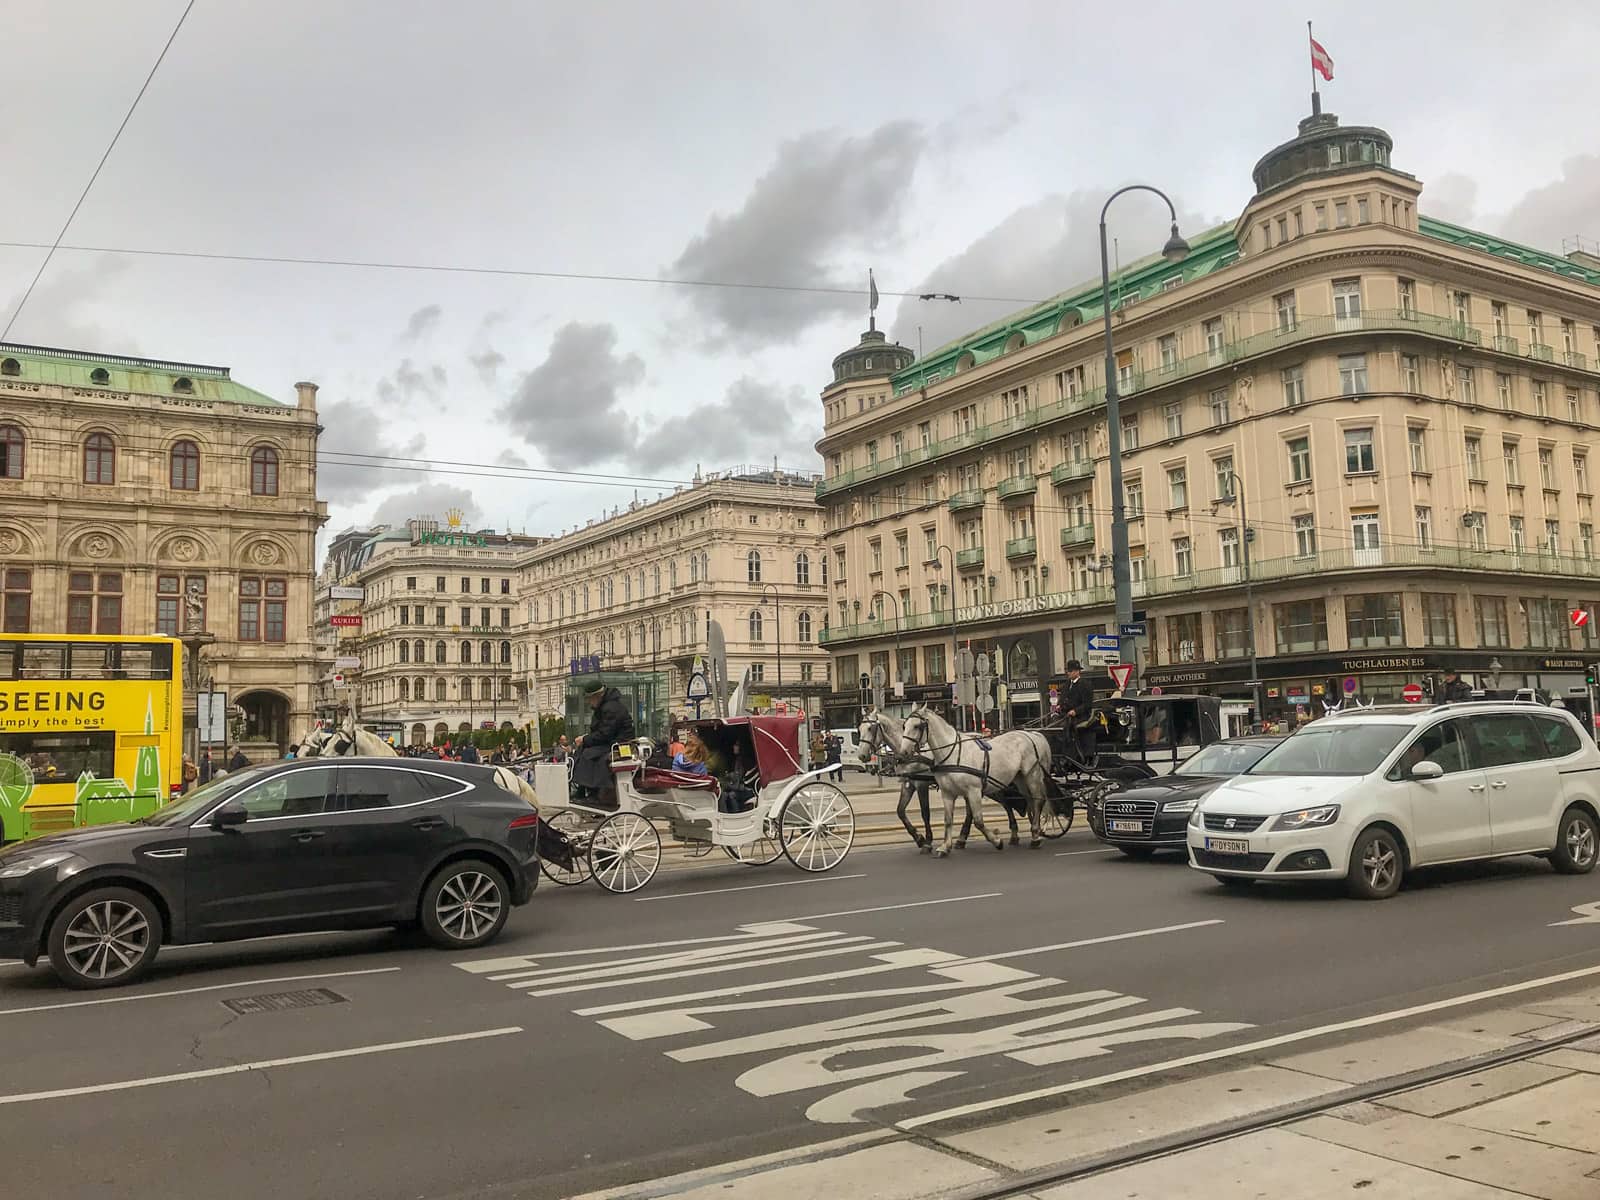 A busy street in Vienna with cars, a bus, and a horse carriage on the road.